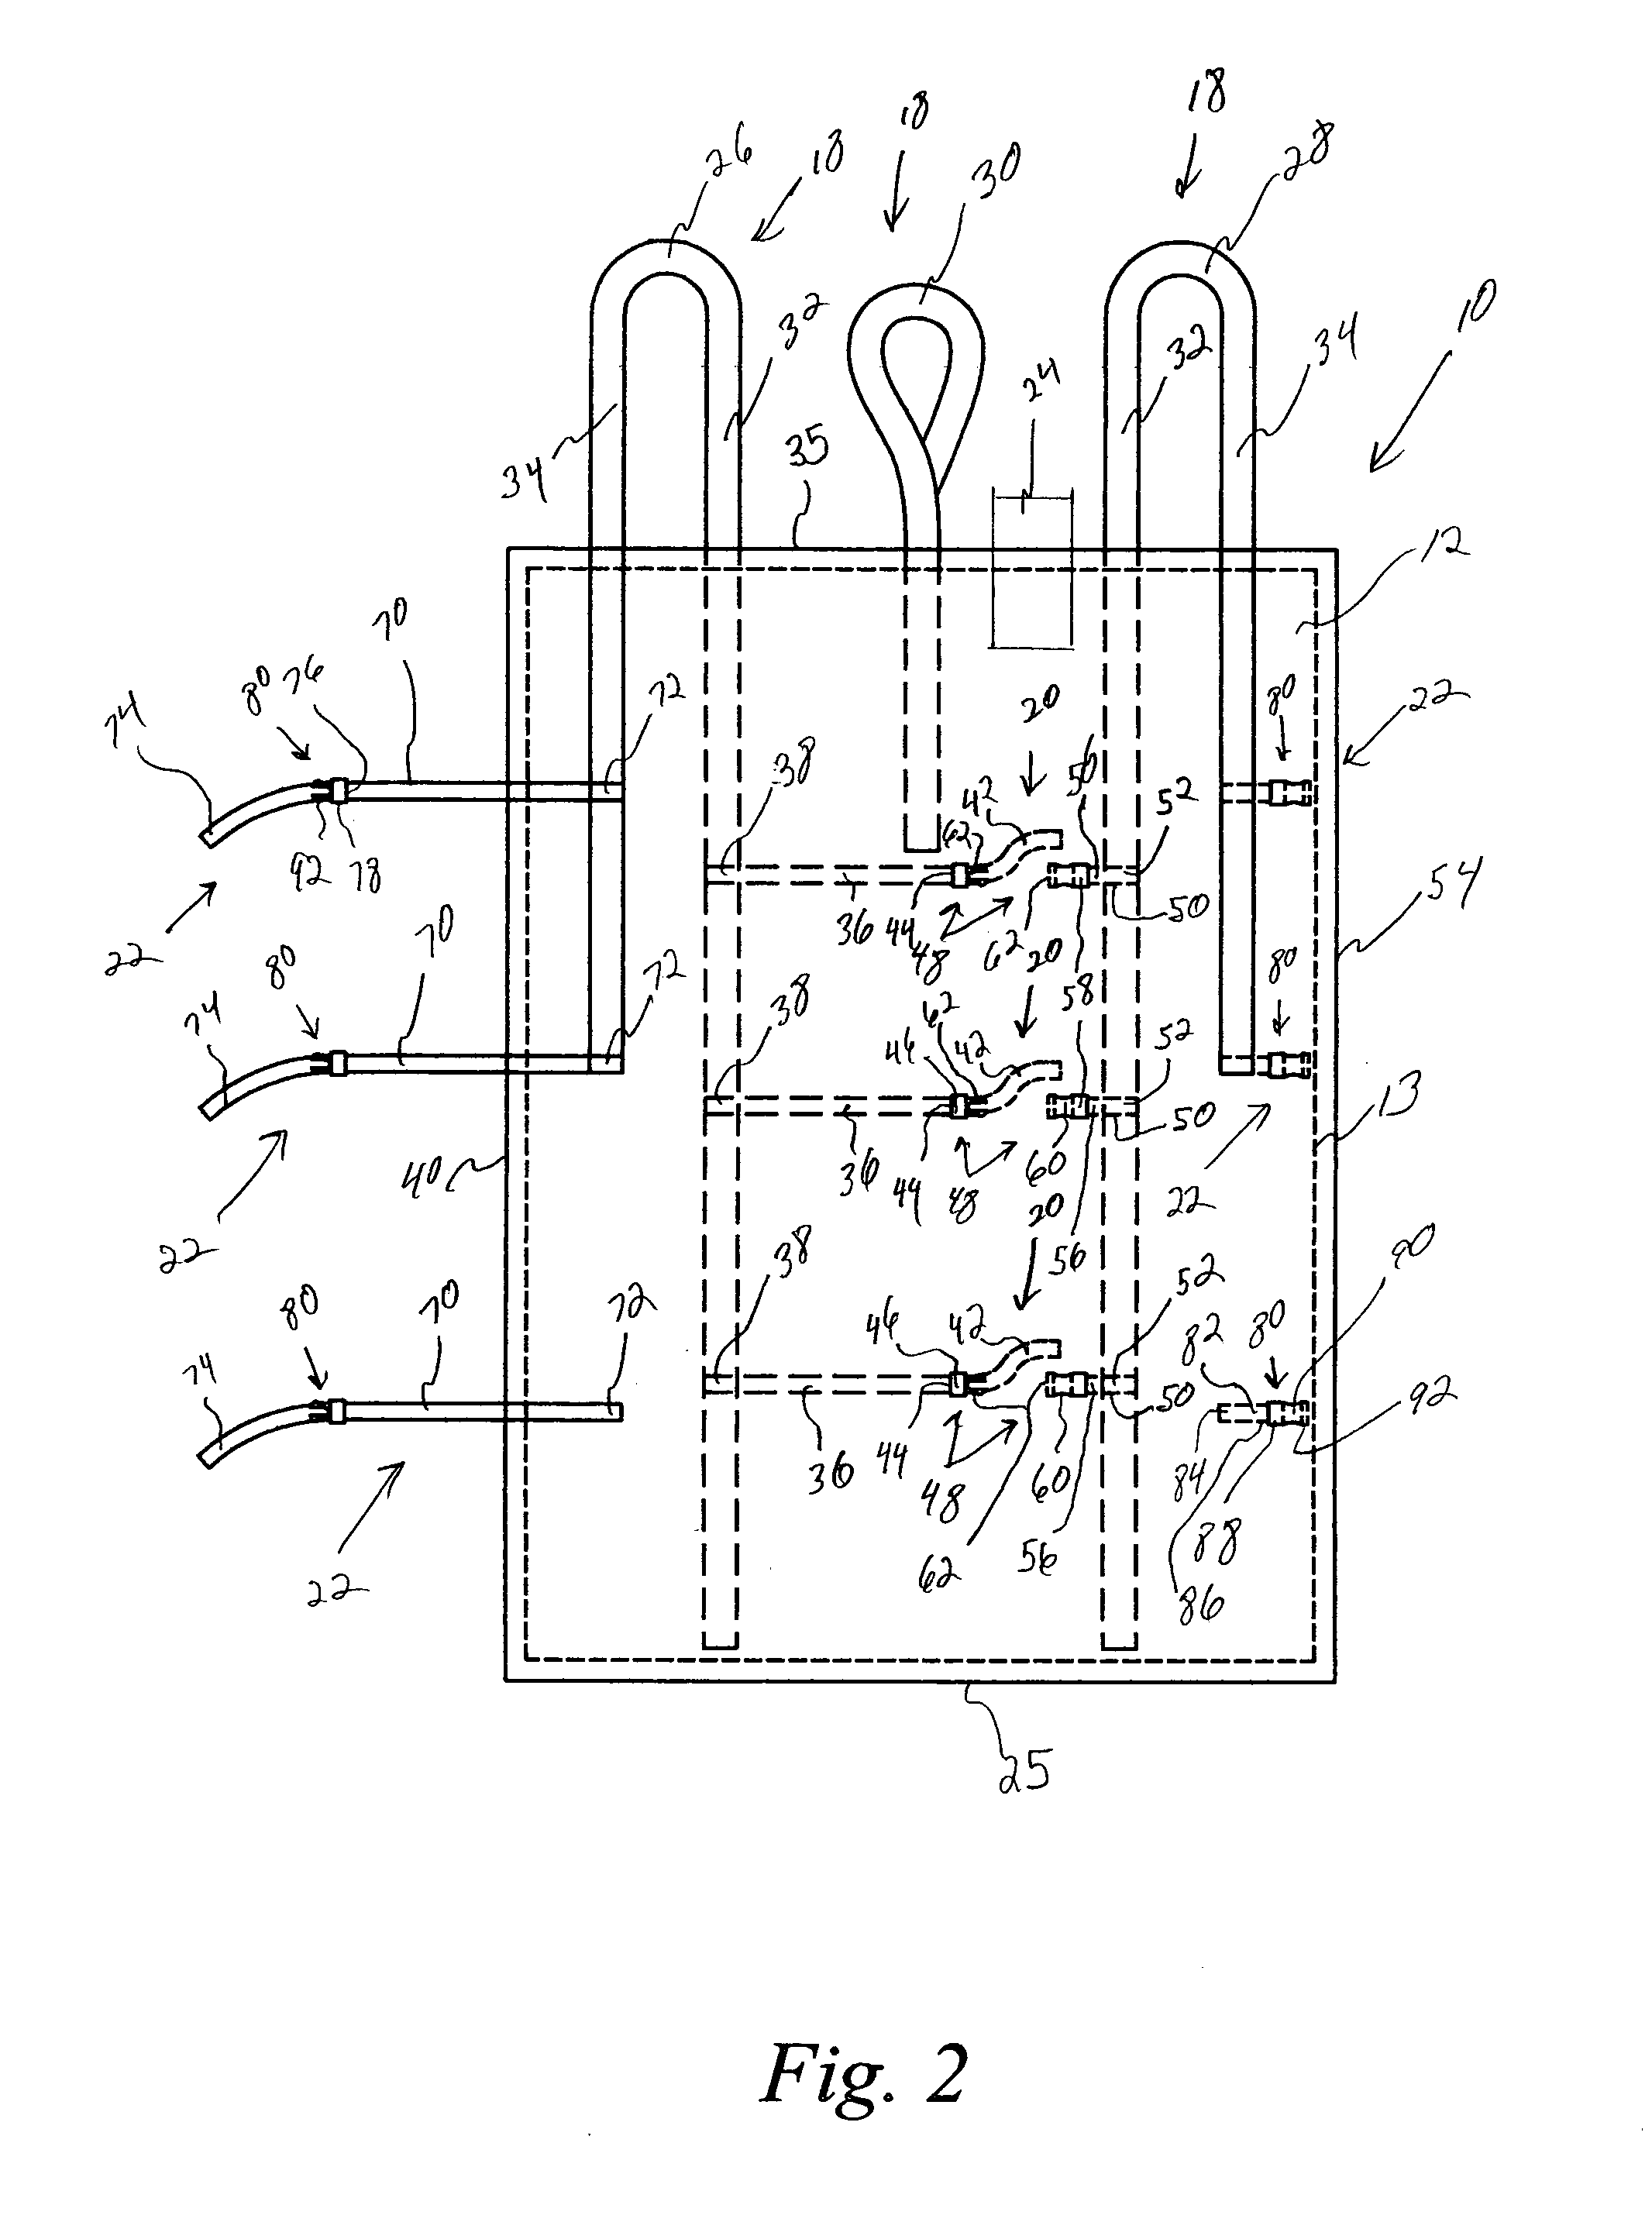 Device for manually transporting a carcass